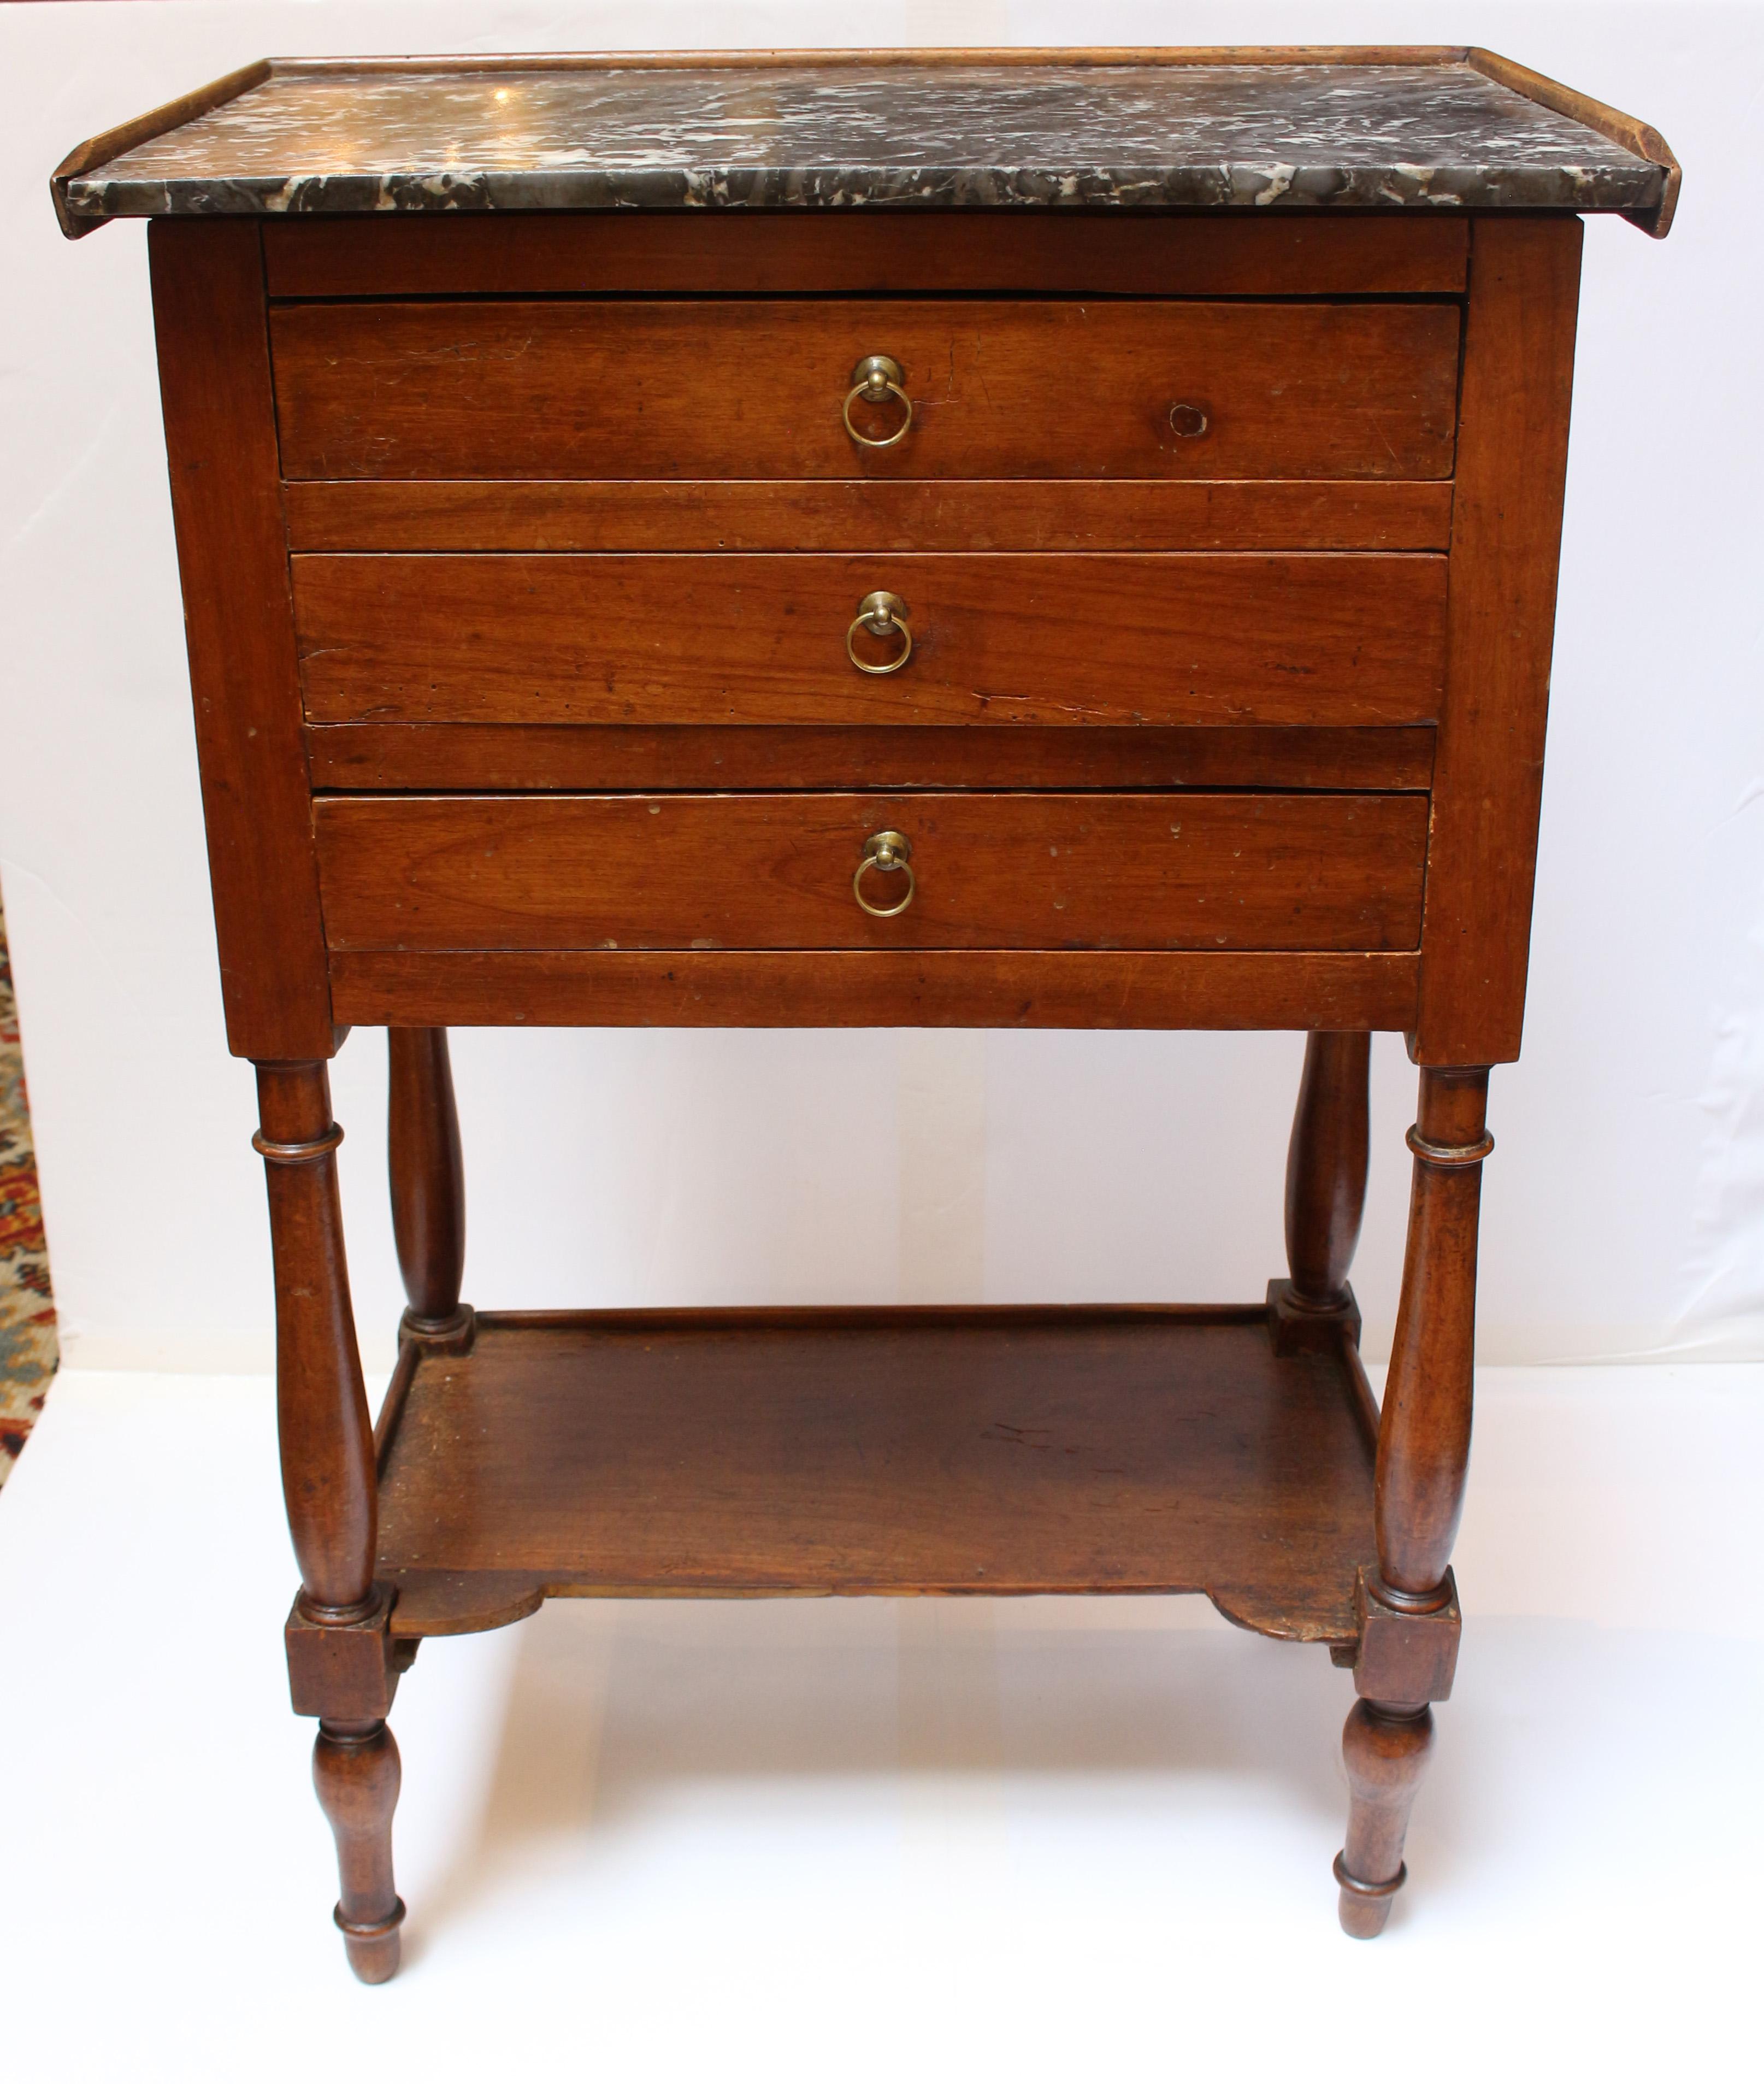 Mid-19th century marble top chevet (bedside table), French. Cherry wood. Louis Philippe. 3 drawers over shaped, molded edge lower tier, following the design of the top. Ring turned vasi-form legs ending in faux sabots. 19 3/4